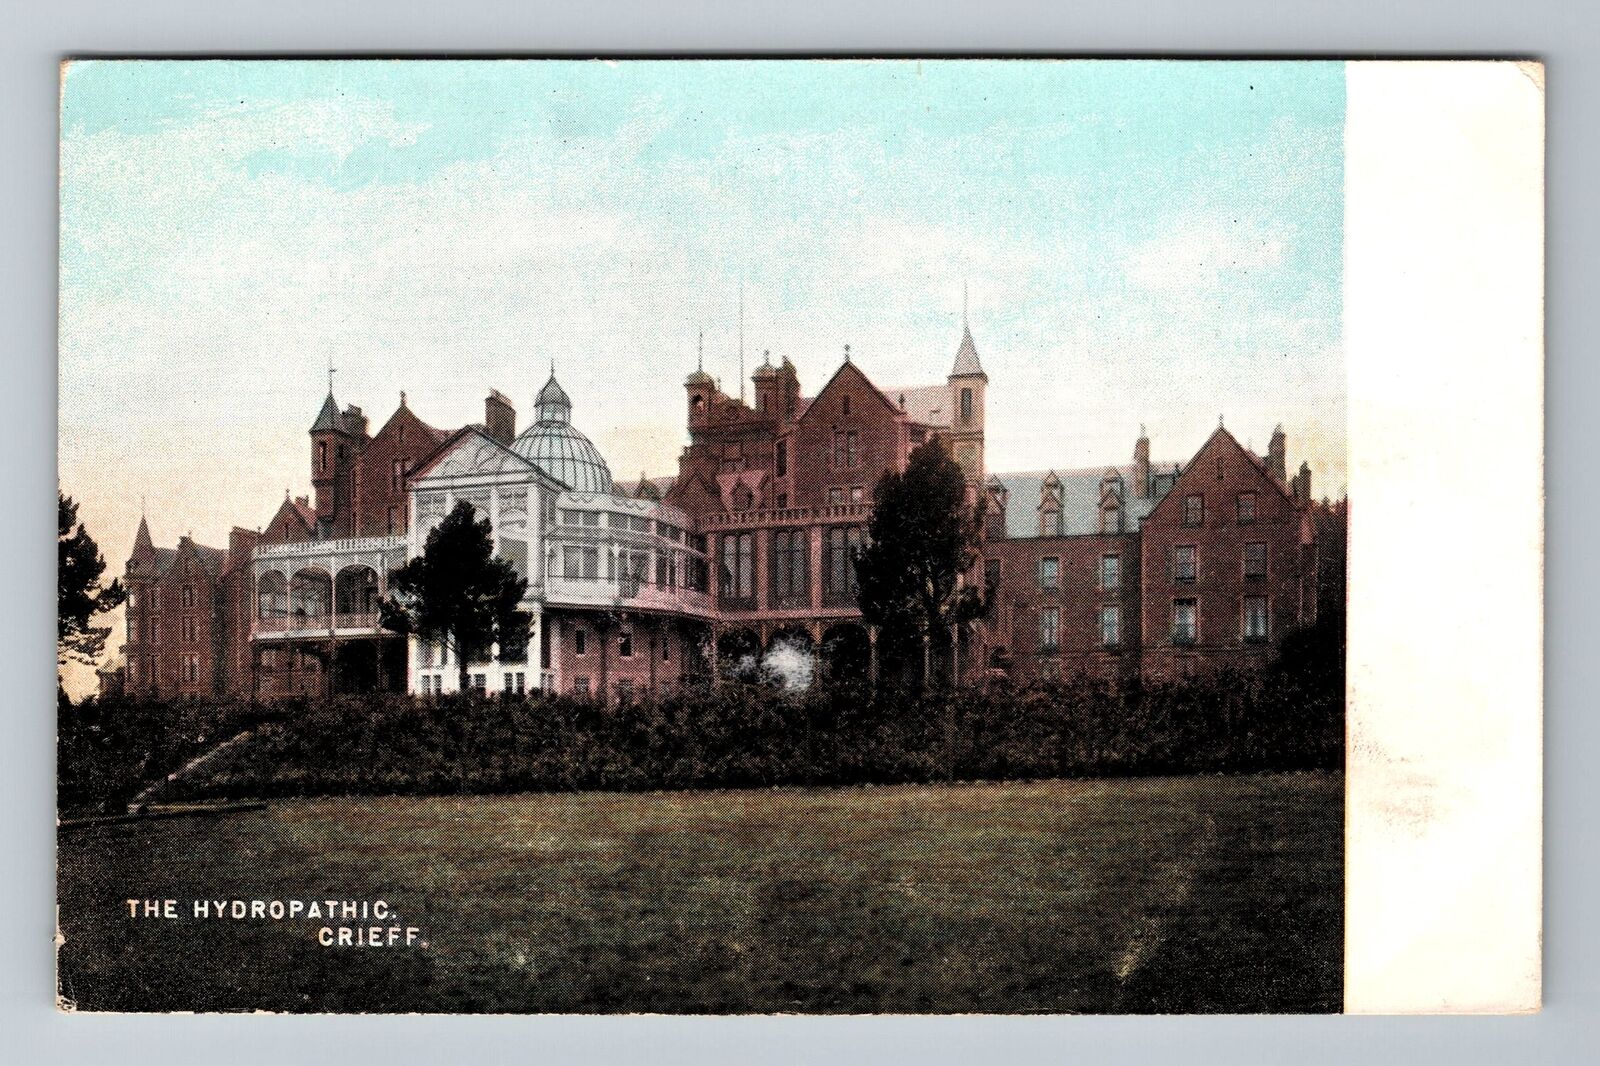 Crieff Perthshire Scotland Hydropathic Hotel Founded 1868 Vintage Postcard